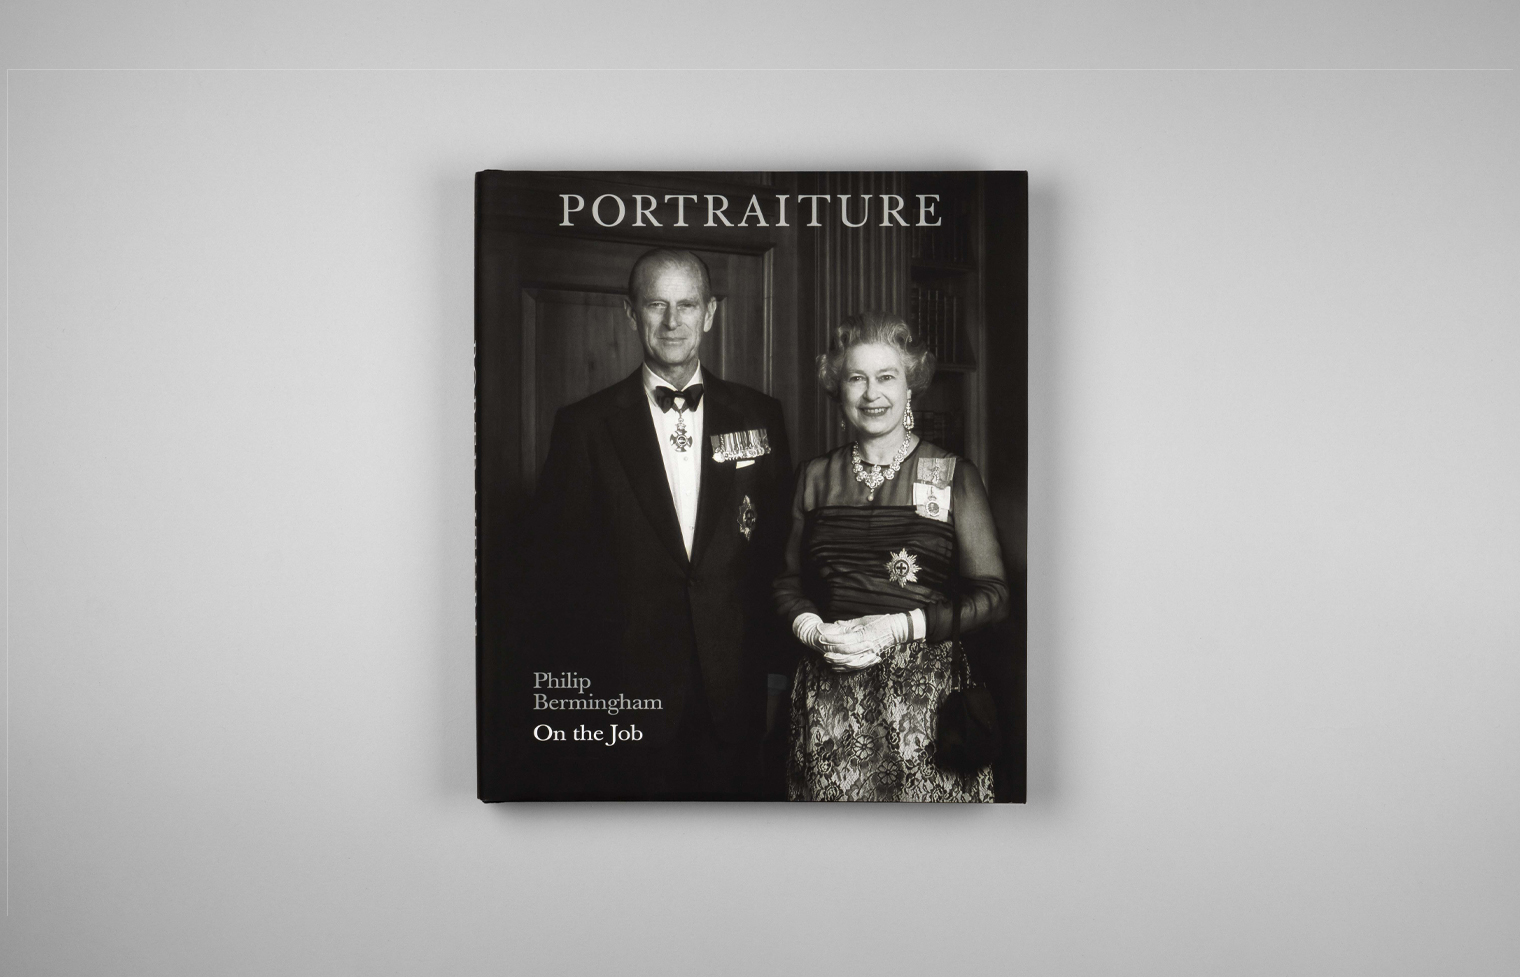 The cover features Prince Philip, Duke of Edinburgh, and Queen Elizabeth II who has her hands folded in front of her.